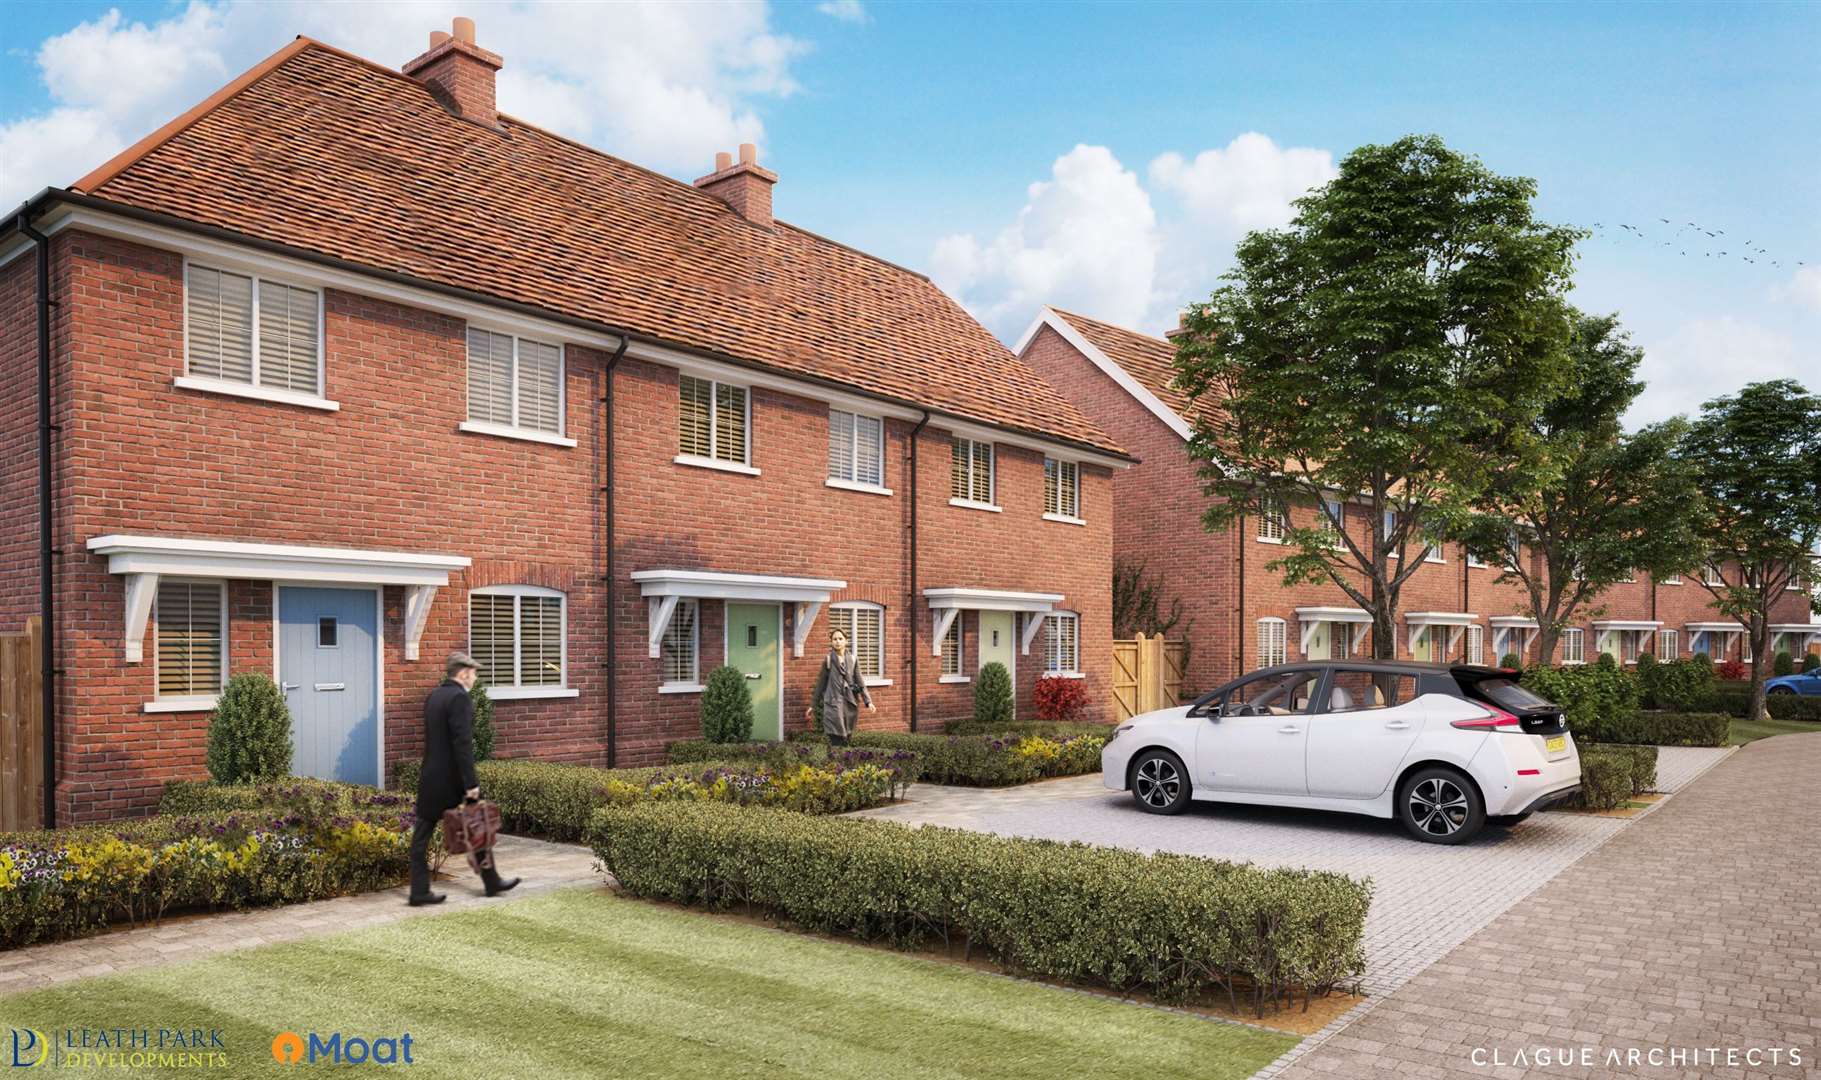 New images of how the homes in Littlebourne will look once built. Picture: Clague Architects. (7820915)